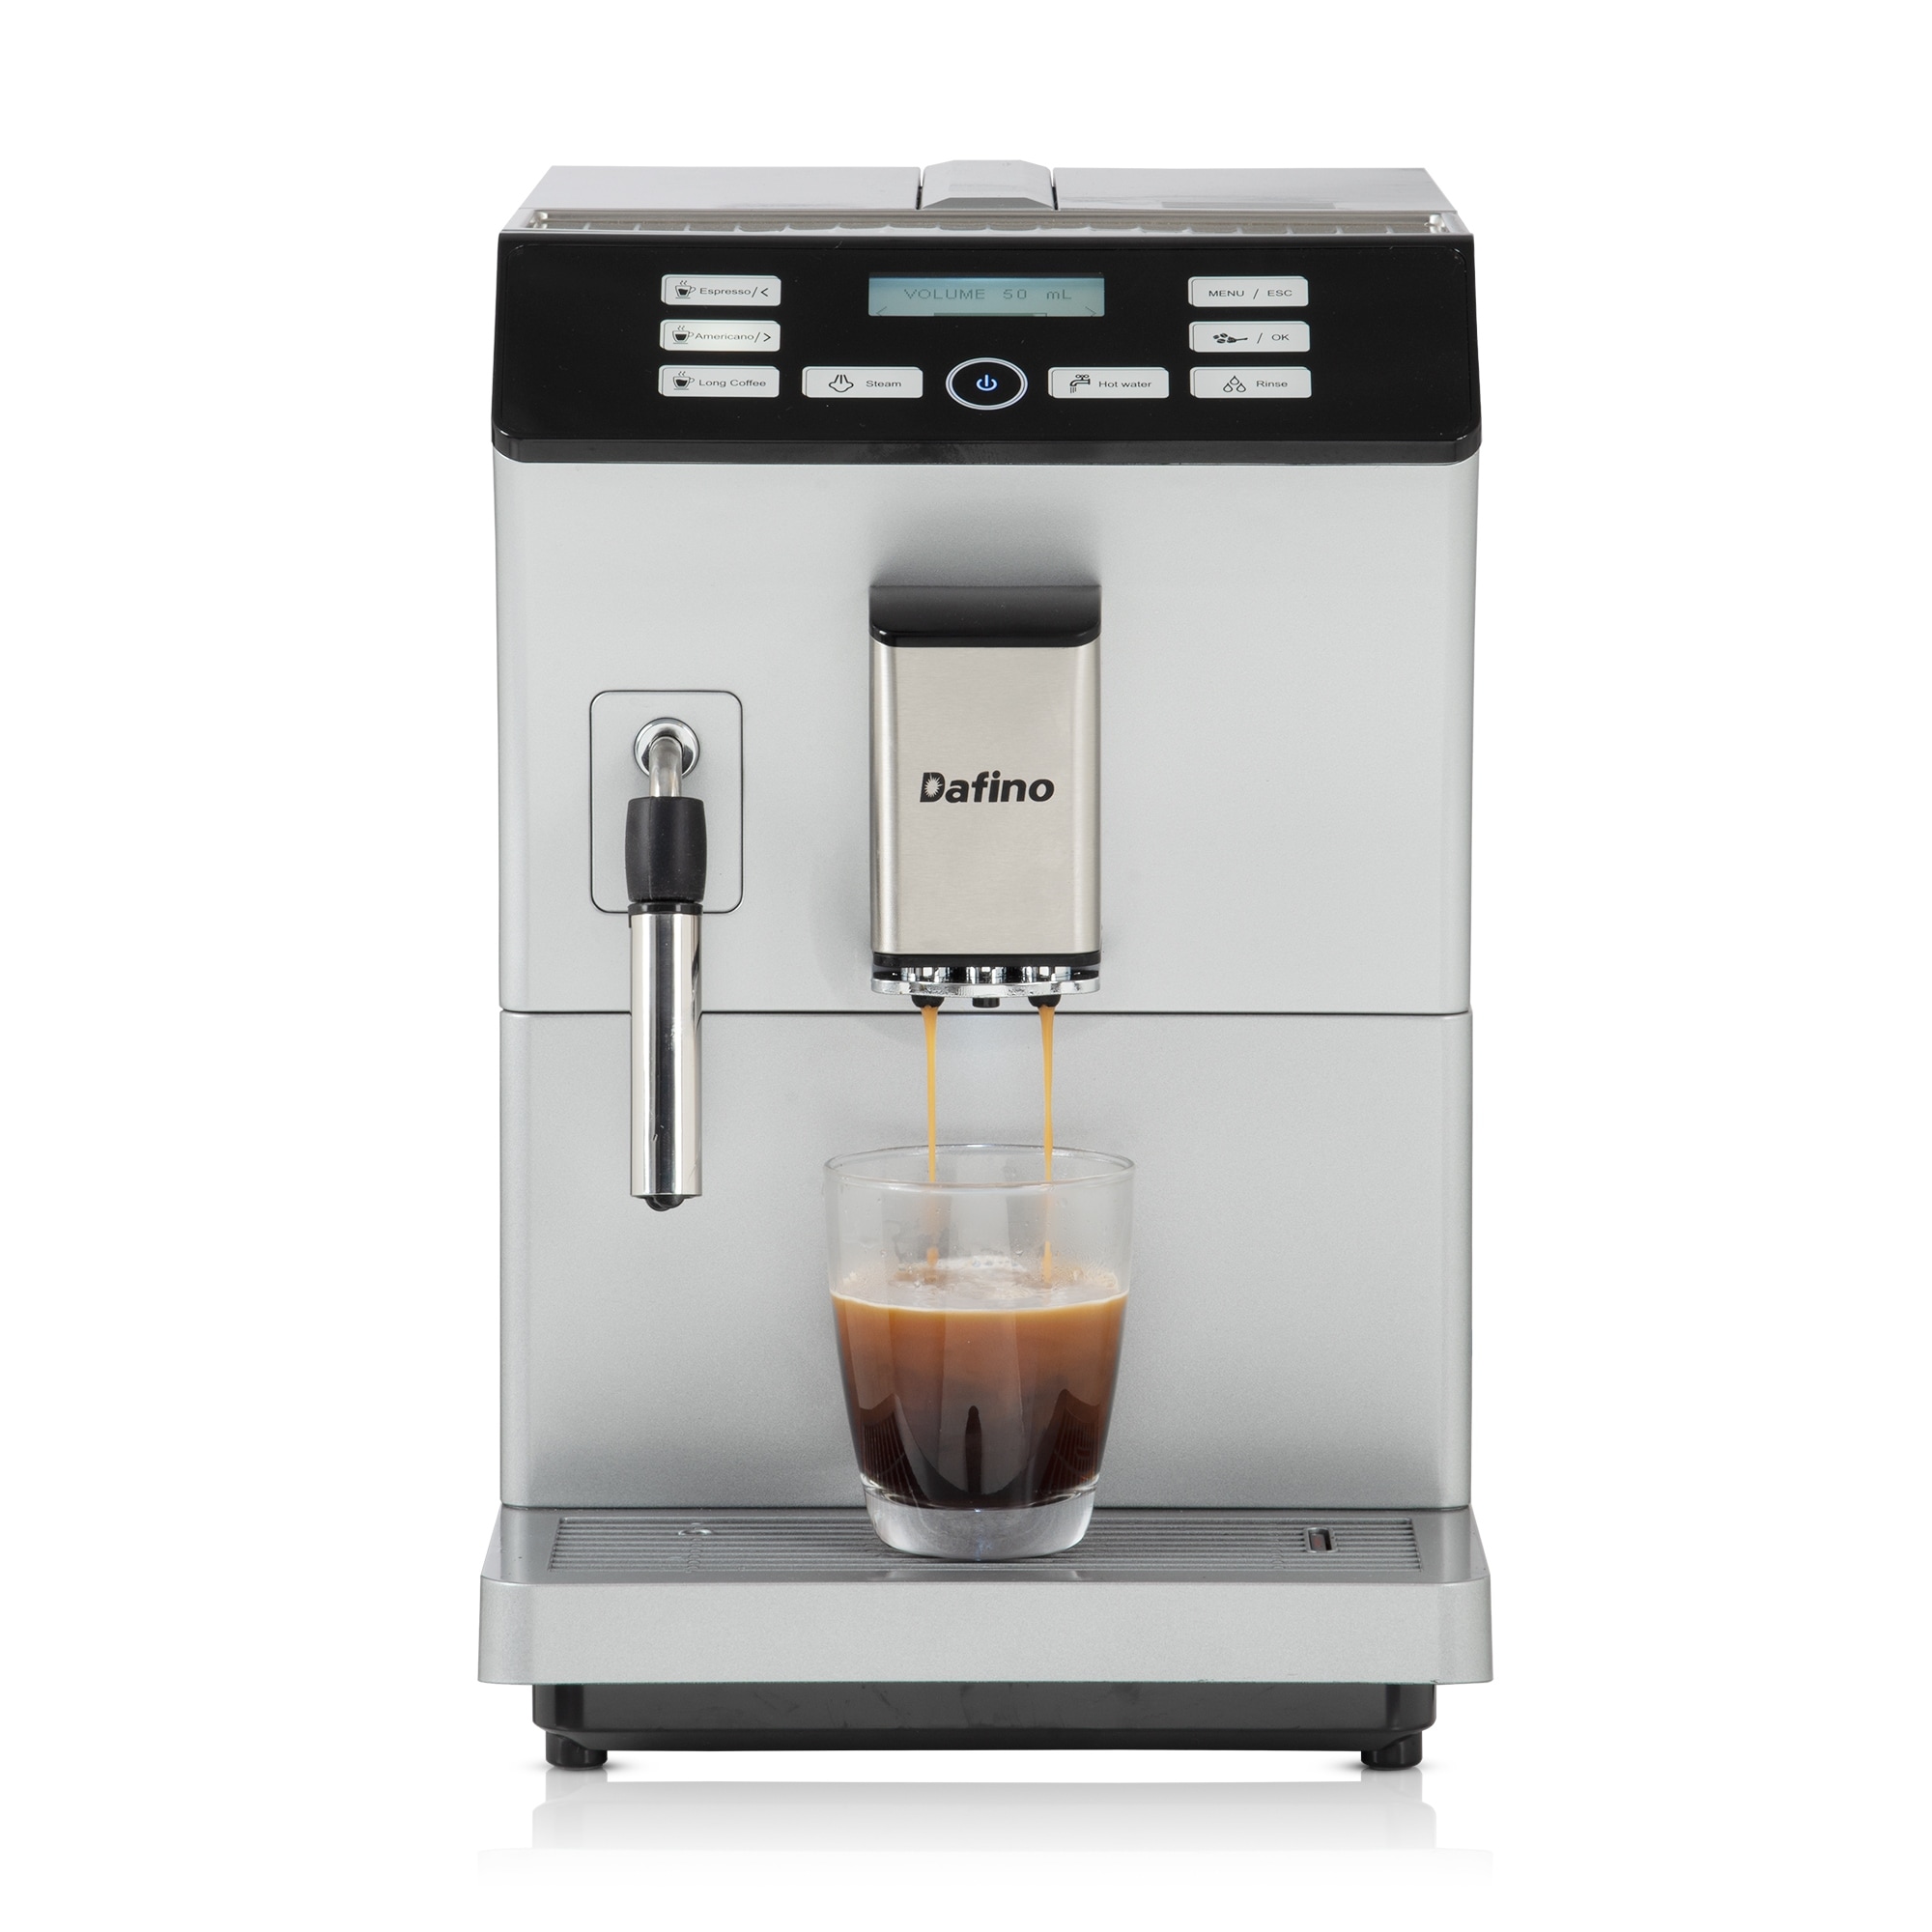 https://ak1.ostkcdn.com/images/products/is/images/direct/bf6070a4ad16d18a96da2adff0cc7fb35cfc9fac/Fully-Automatic-Espresso-Machine-with-Milk-Frother-Silver-Enjoy-Freshly-Ground-Italian-Style-Coffee-with-One-Click.jpg